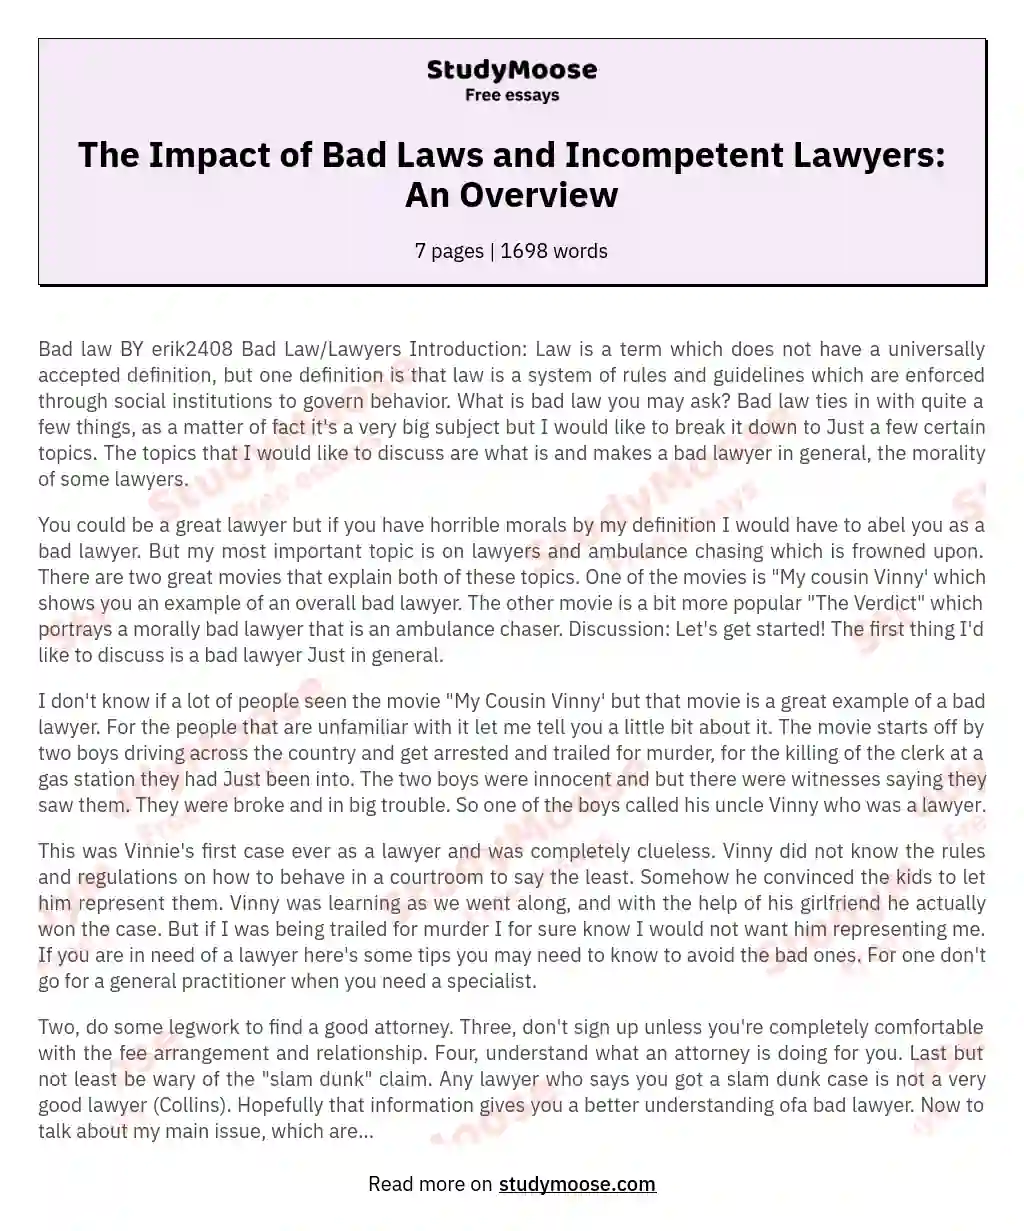 The Impact of Bad Laws and Incompetent Lawyers: An Overview essay